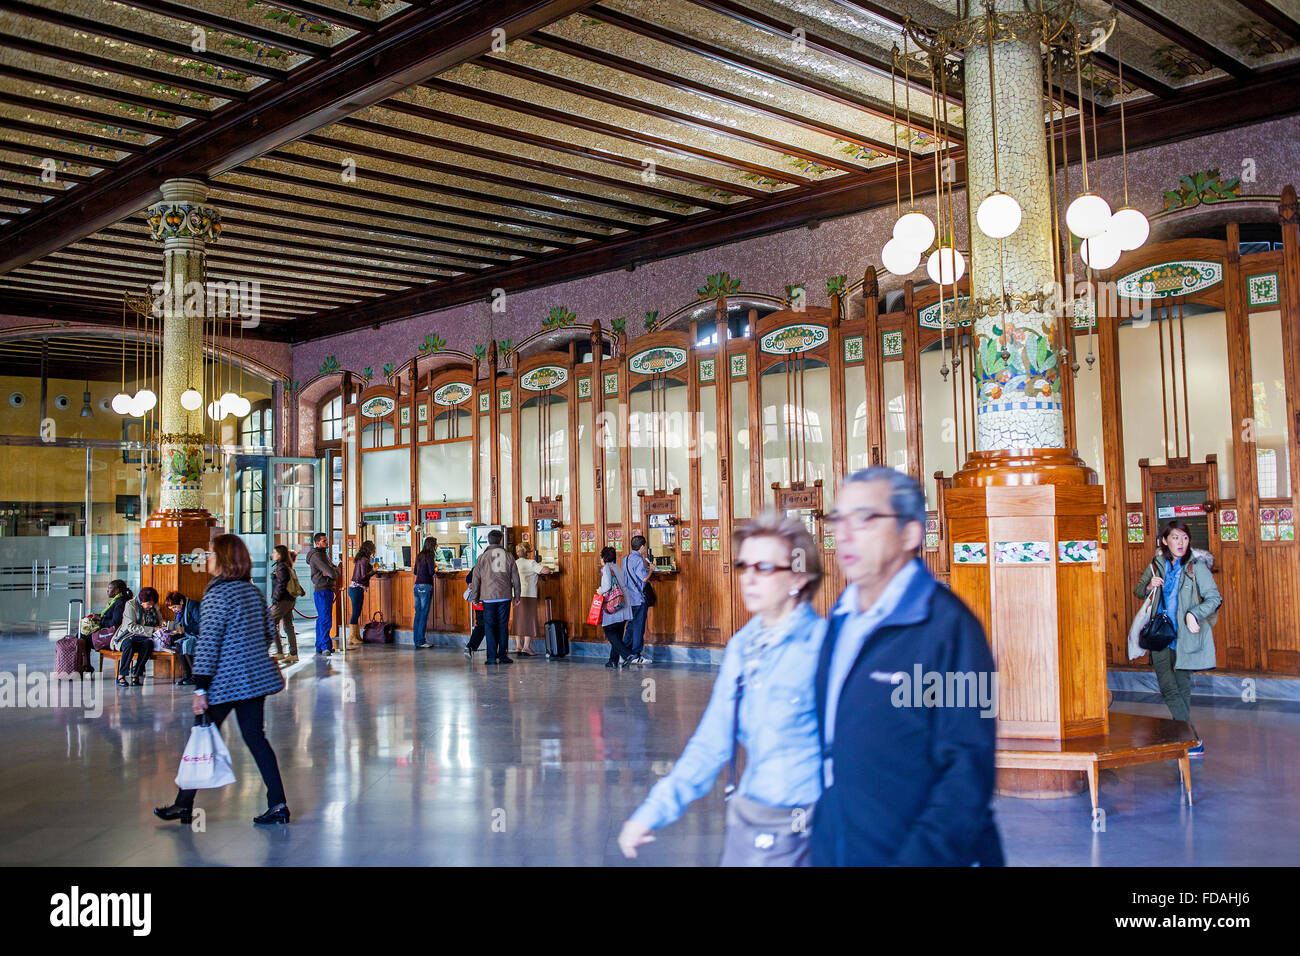 North Station Railway. It was built, in art nouveau style, between 1909 and 1917,Valencia, Spain. Stock Photo